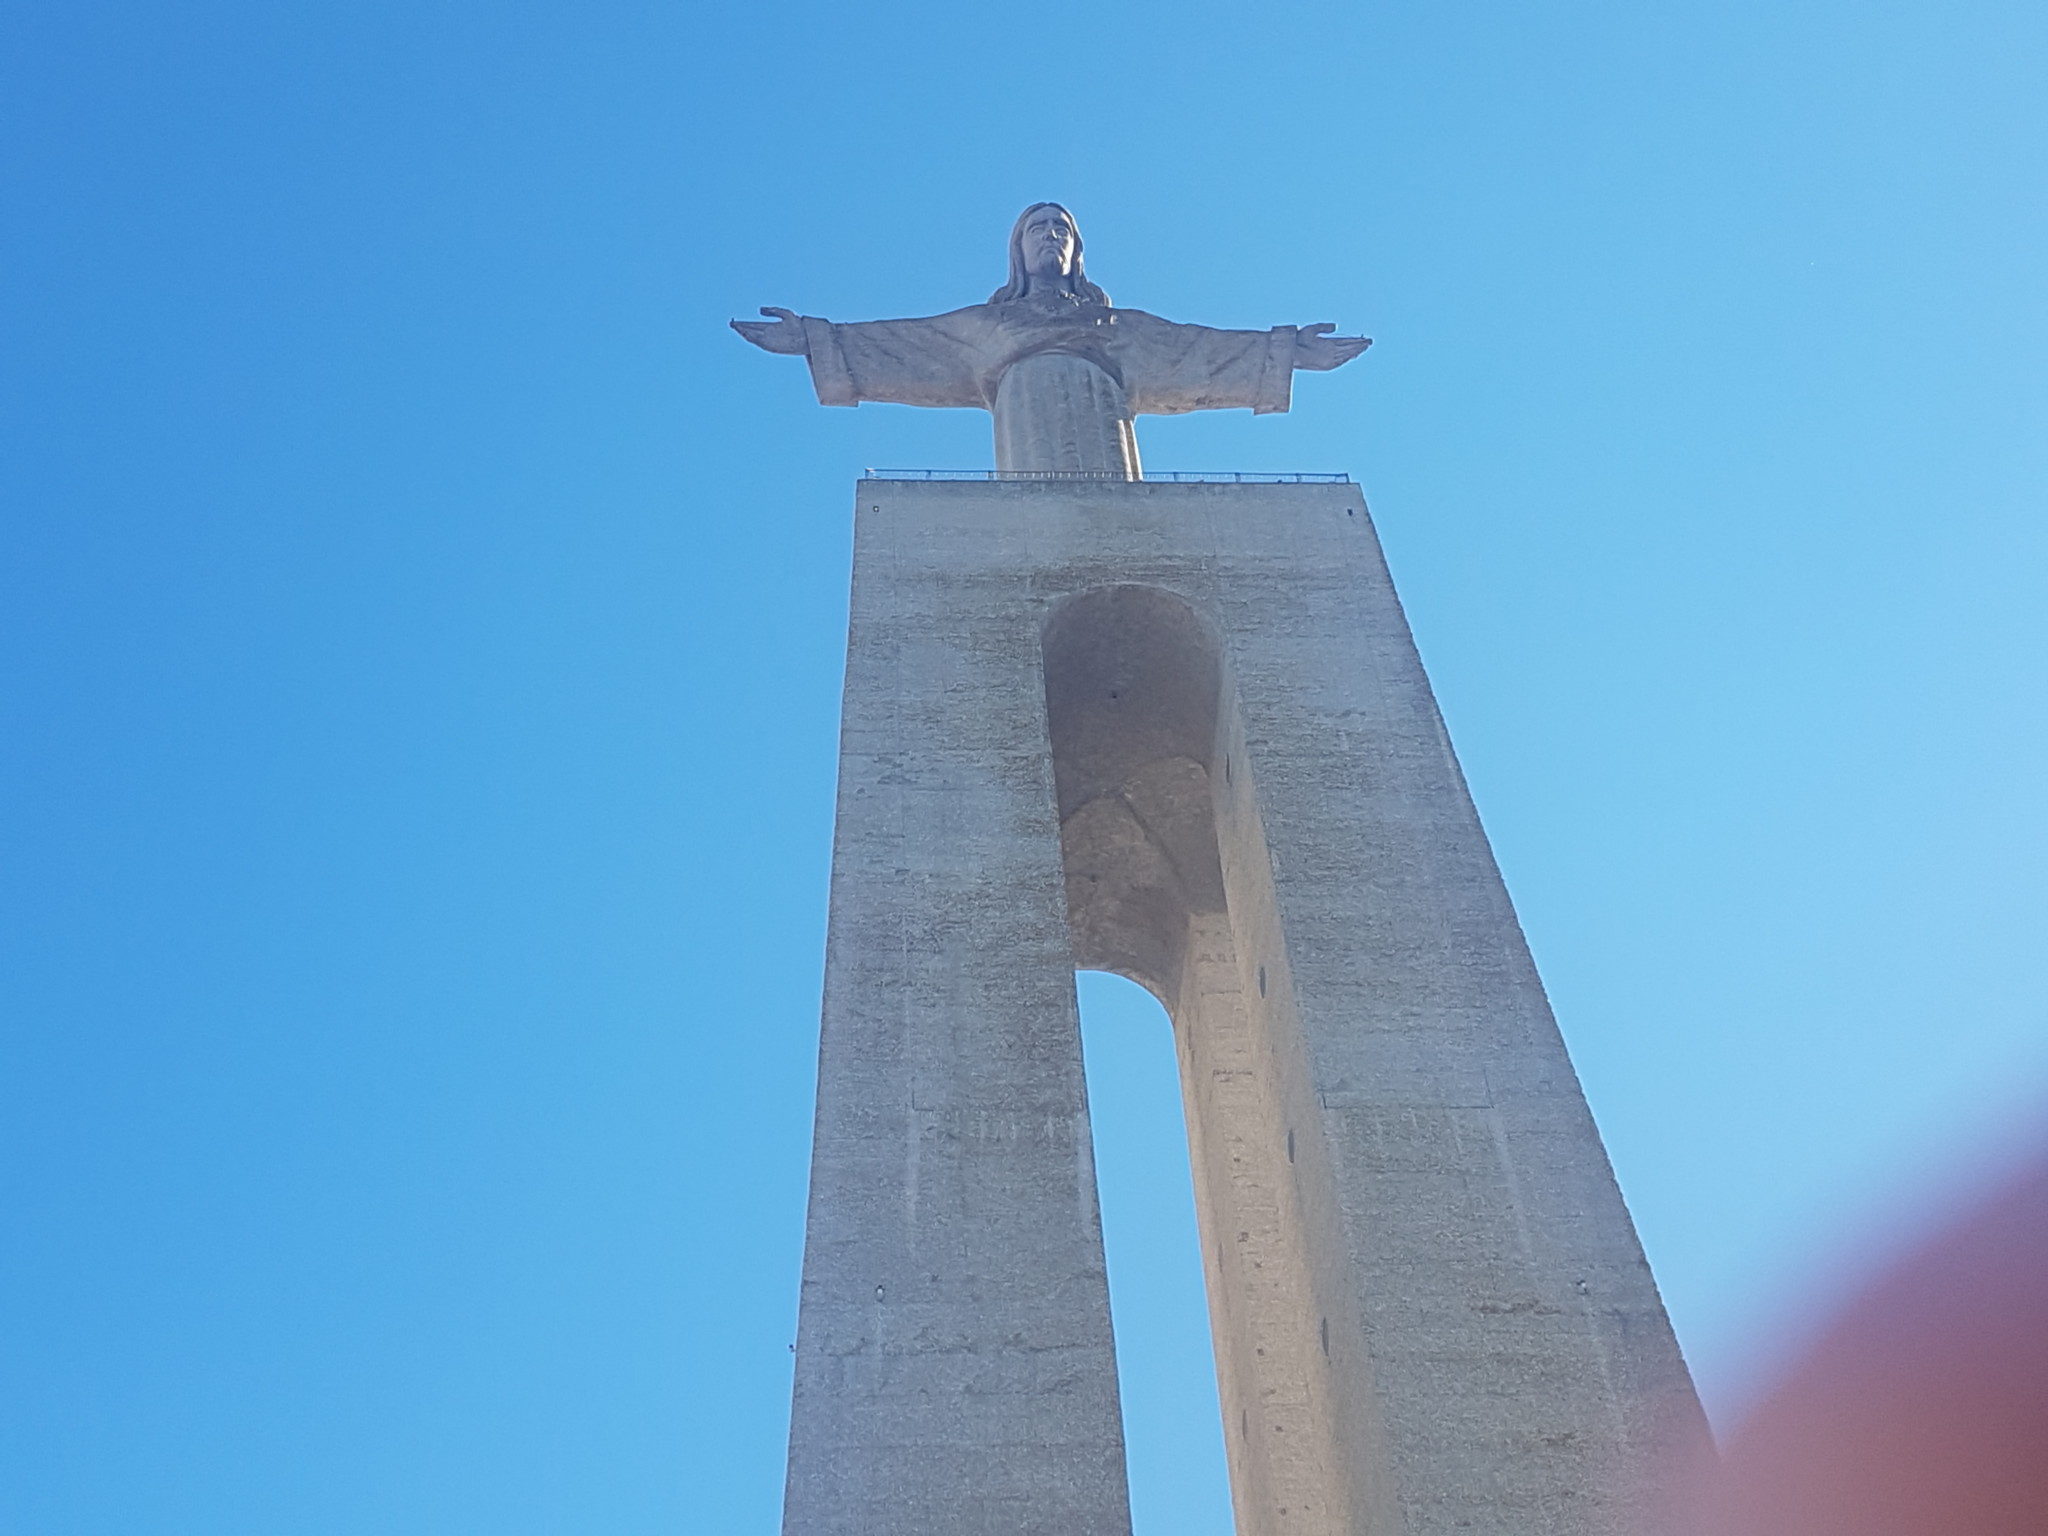 Big Jesus Overlooking the Bay - Our Cab Driver took Us Here By Surprise